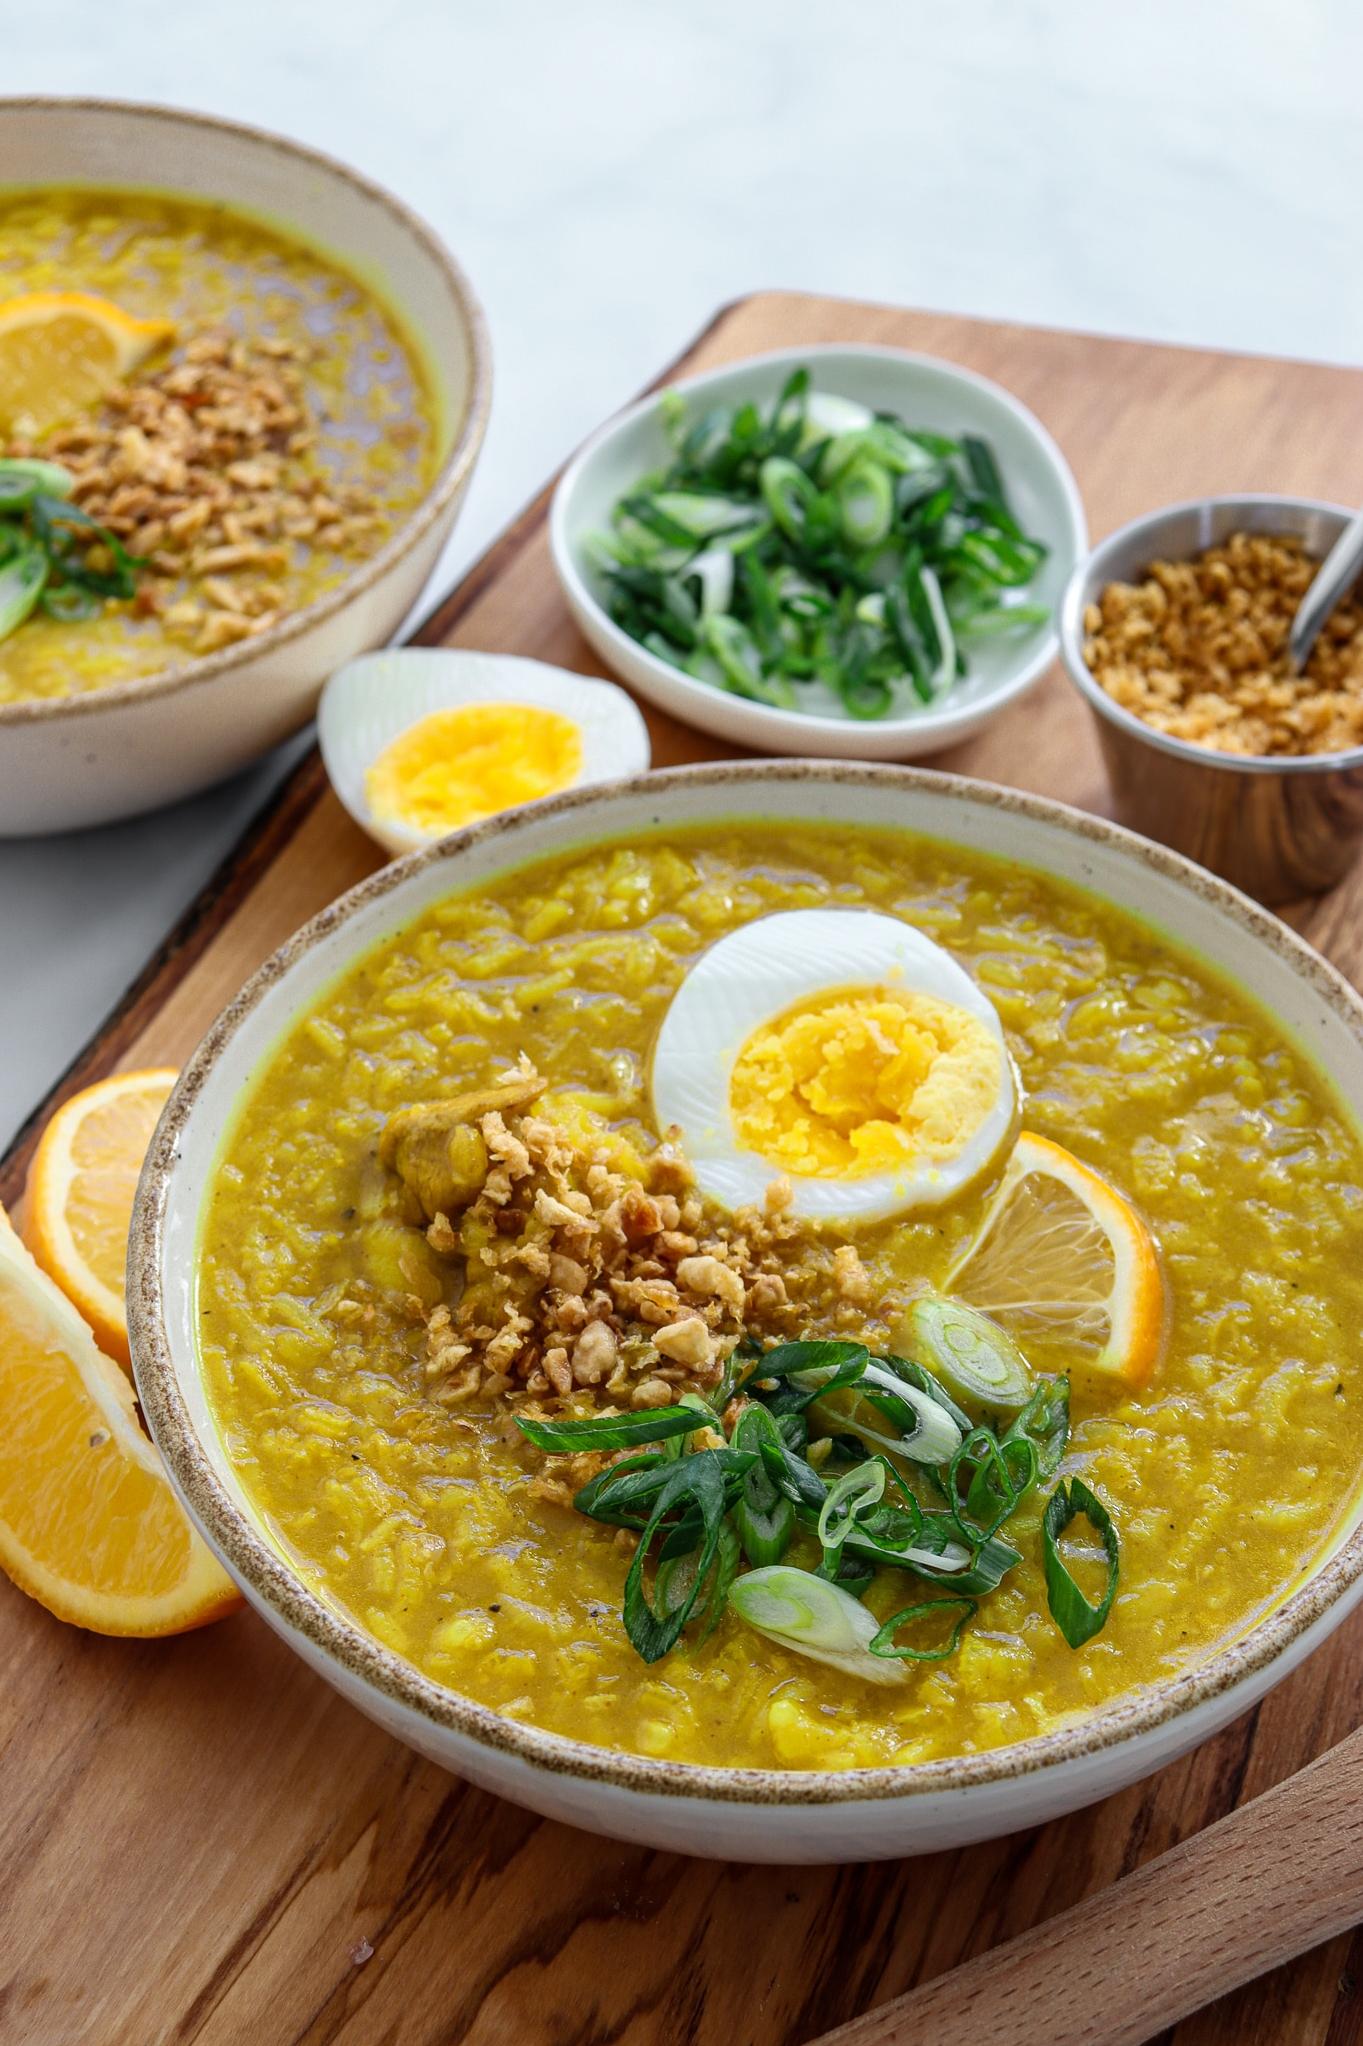  This Arroz Caldo recipe will make you forget about chicken soup on a cold day.